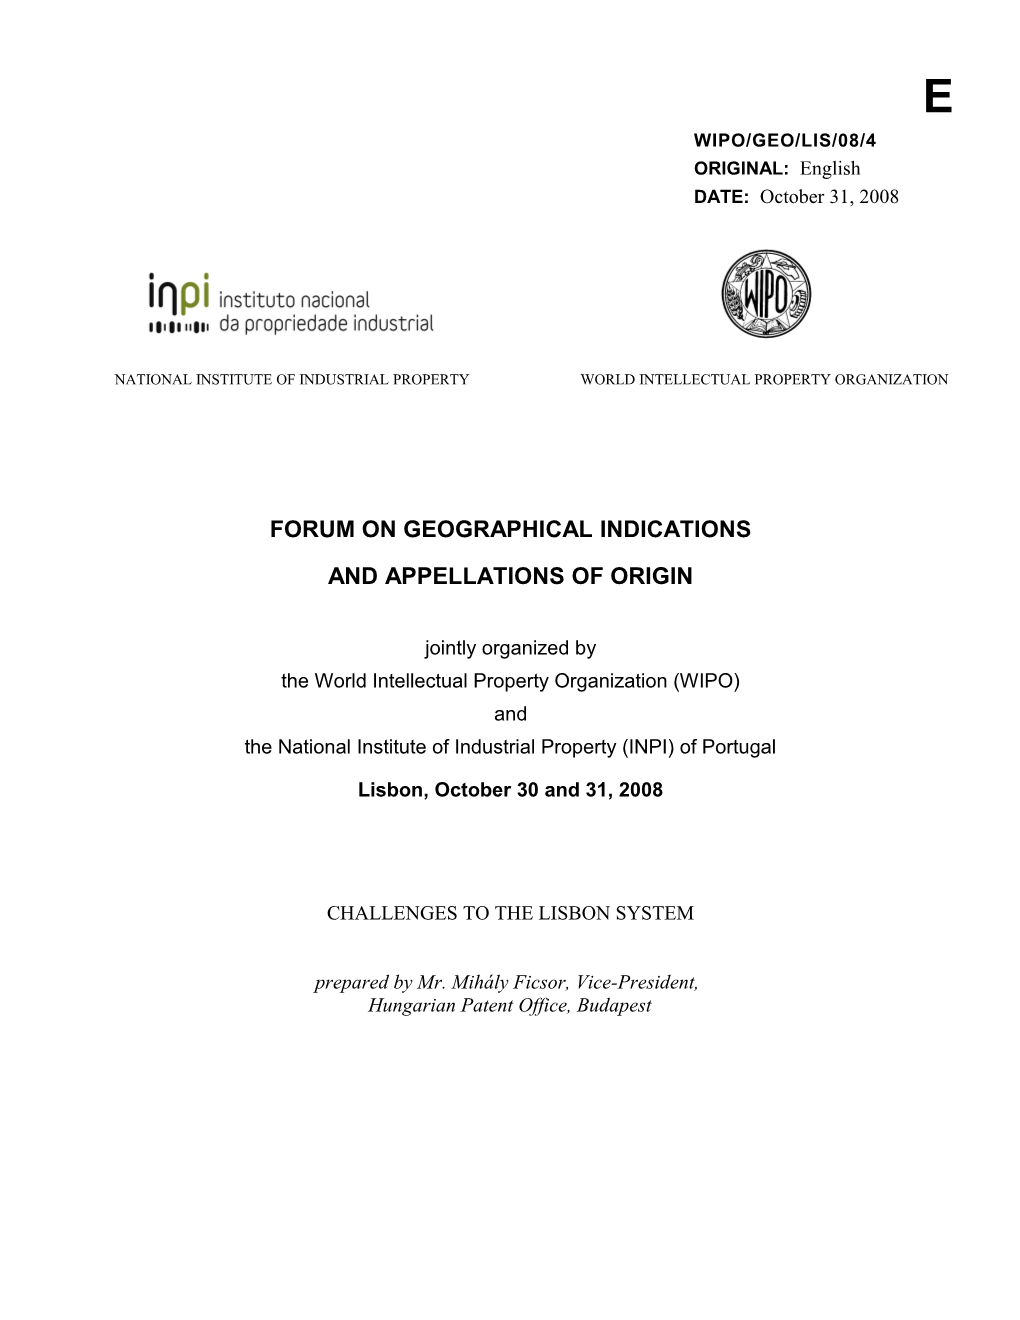 FORUM on Geographical Indications